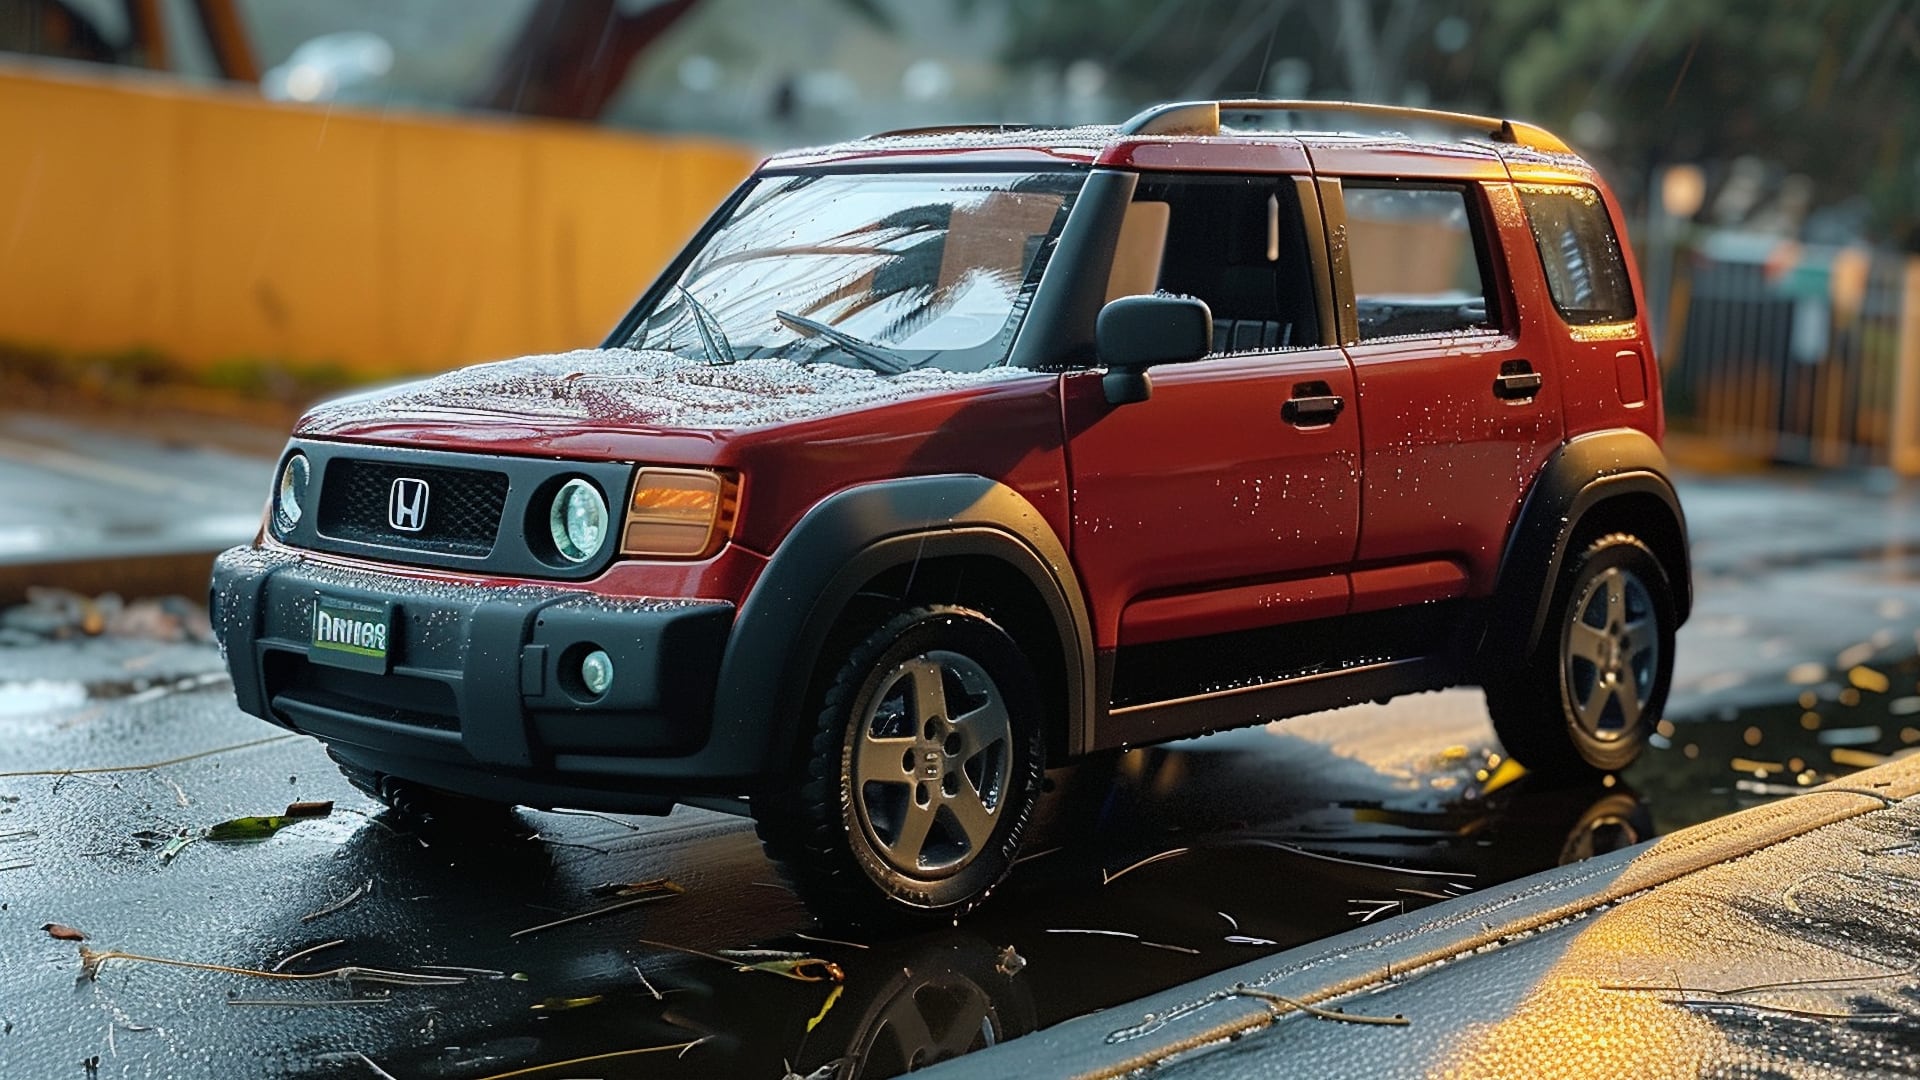 A red Honda Element toy SUV is parked on a wet street.